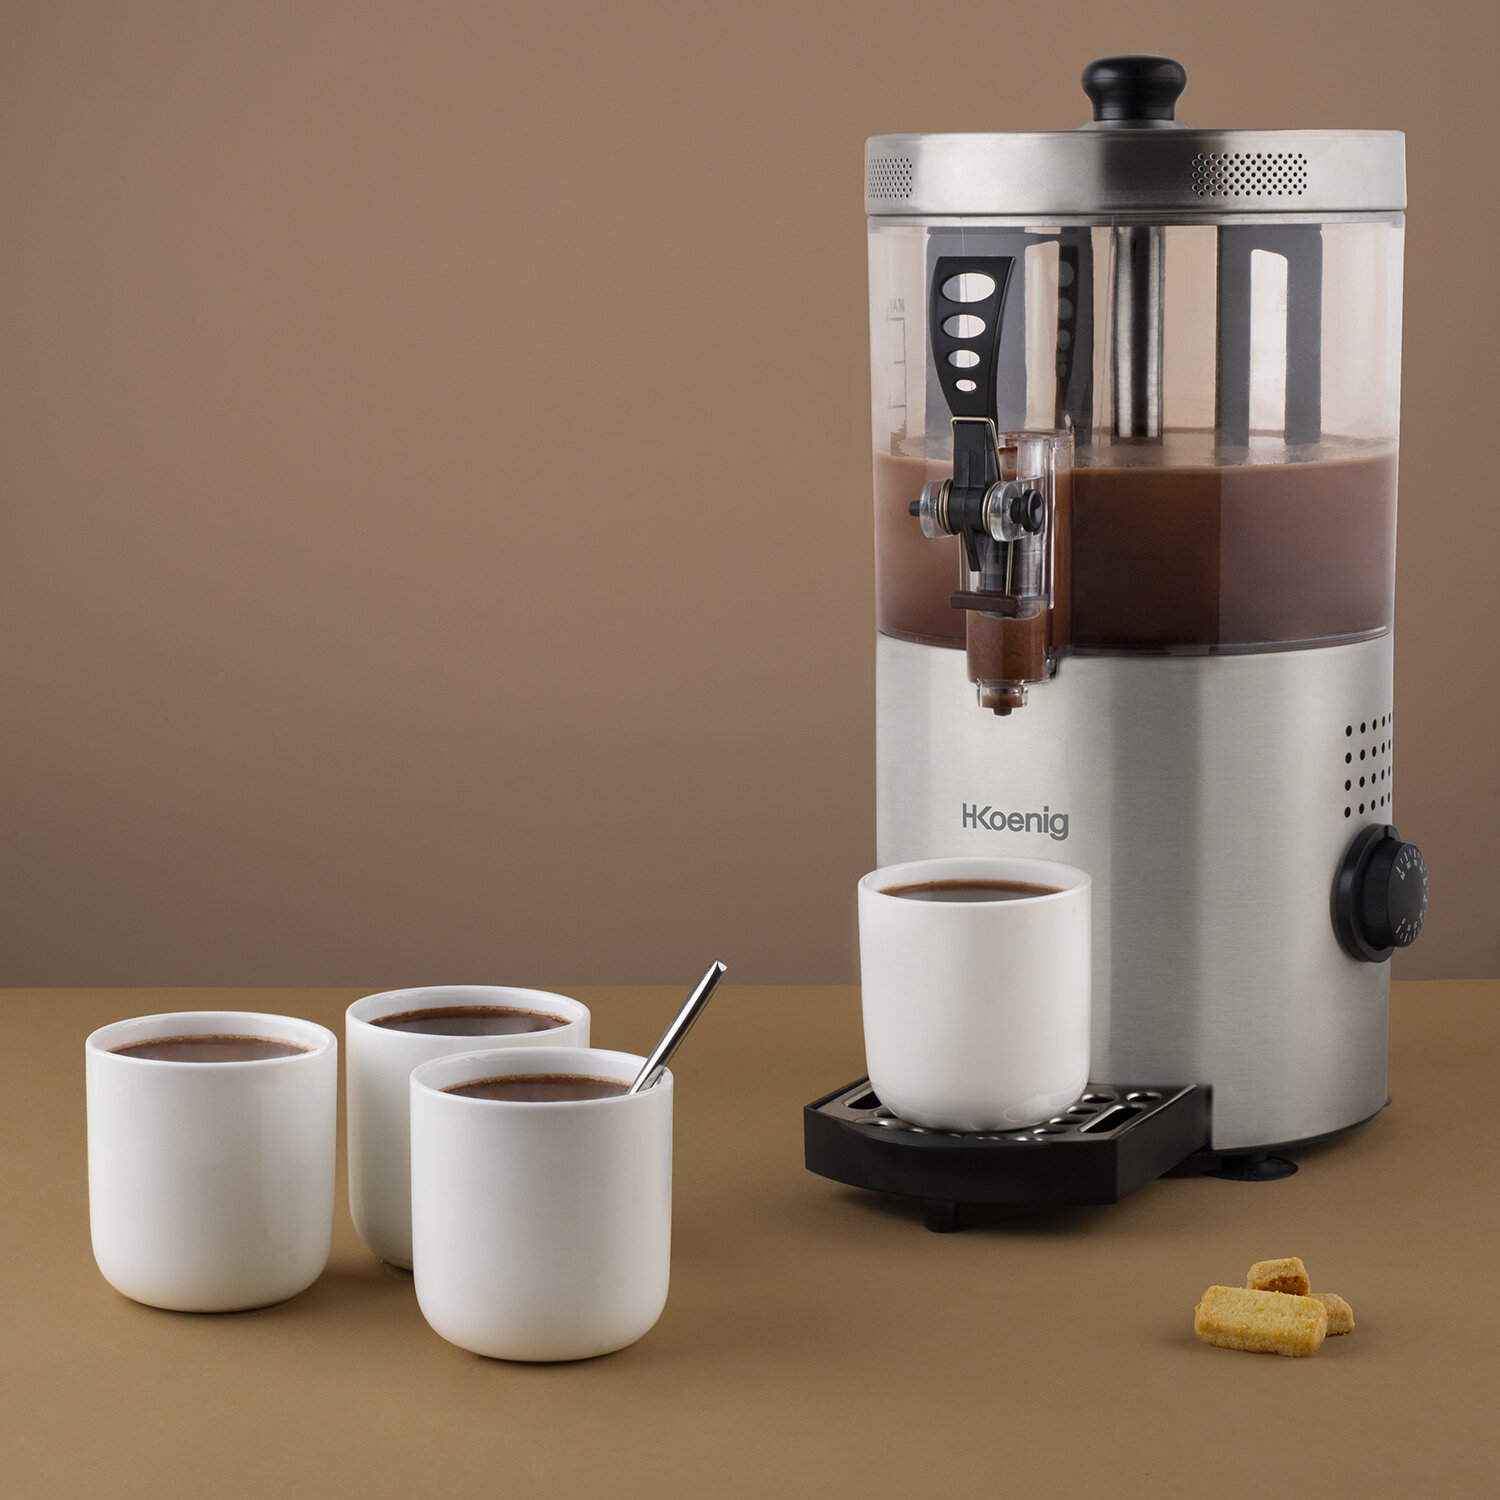 Our products > friendly cooking > hot chocolate dispenser : Koenig - EN